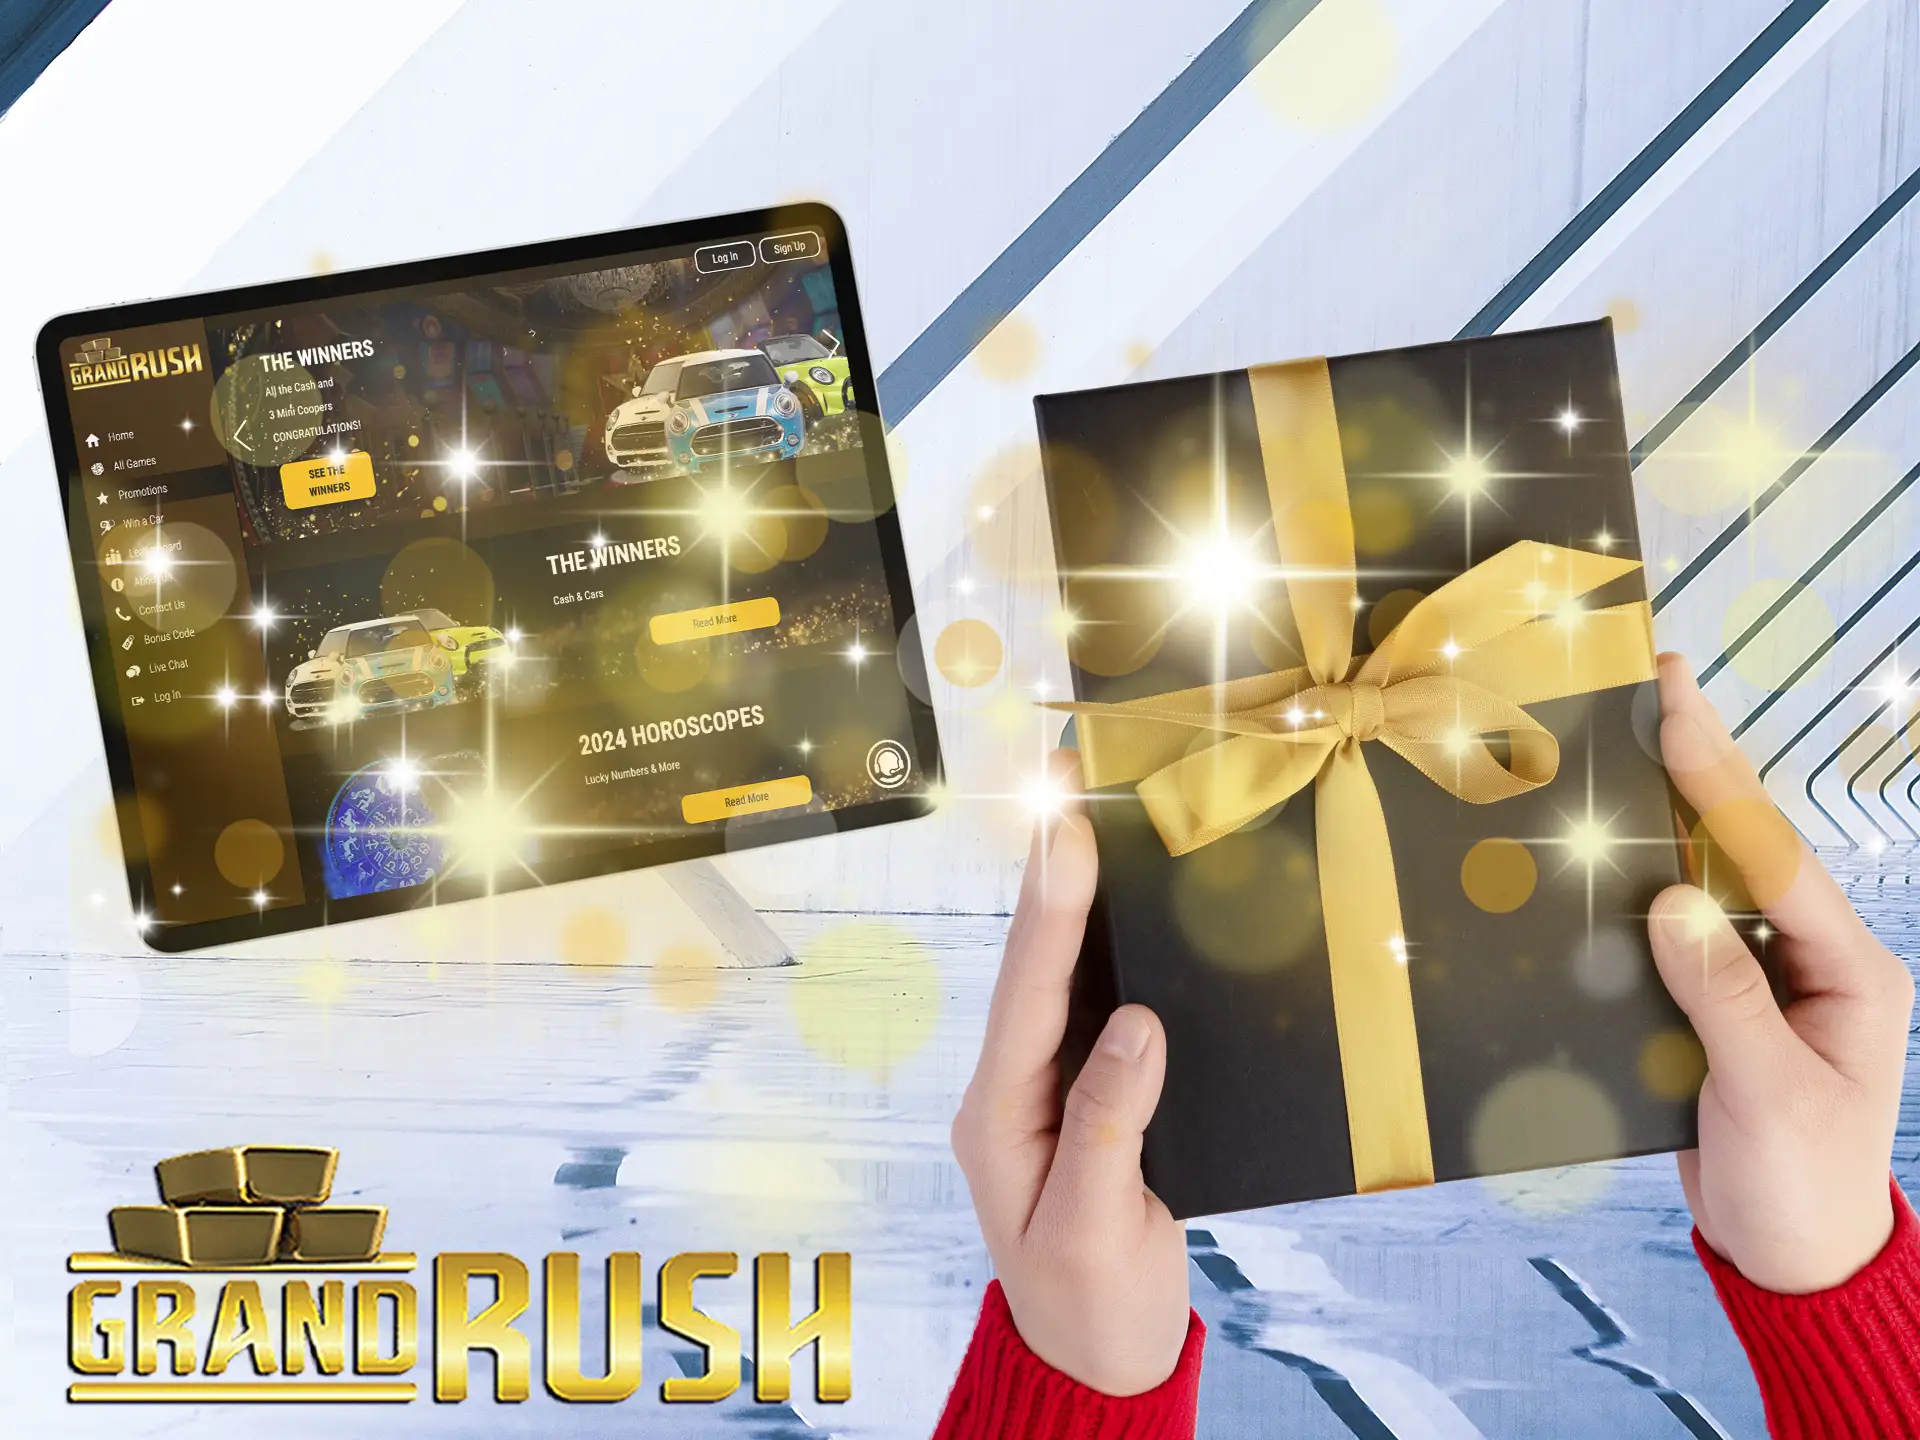 Register and make a first deposit to get the Grand Rush sign up bonuses.